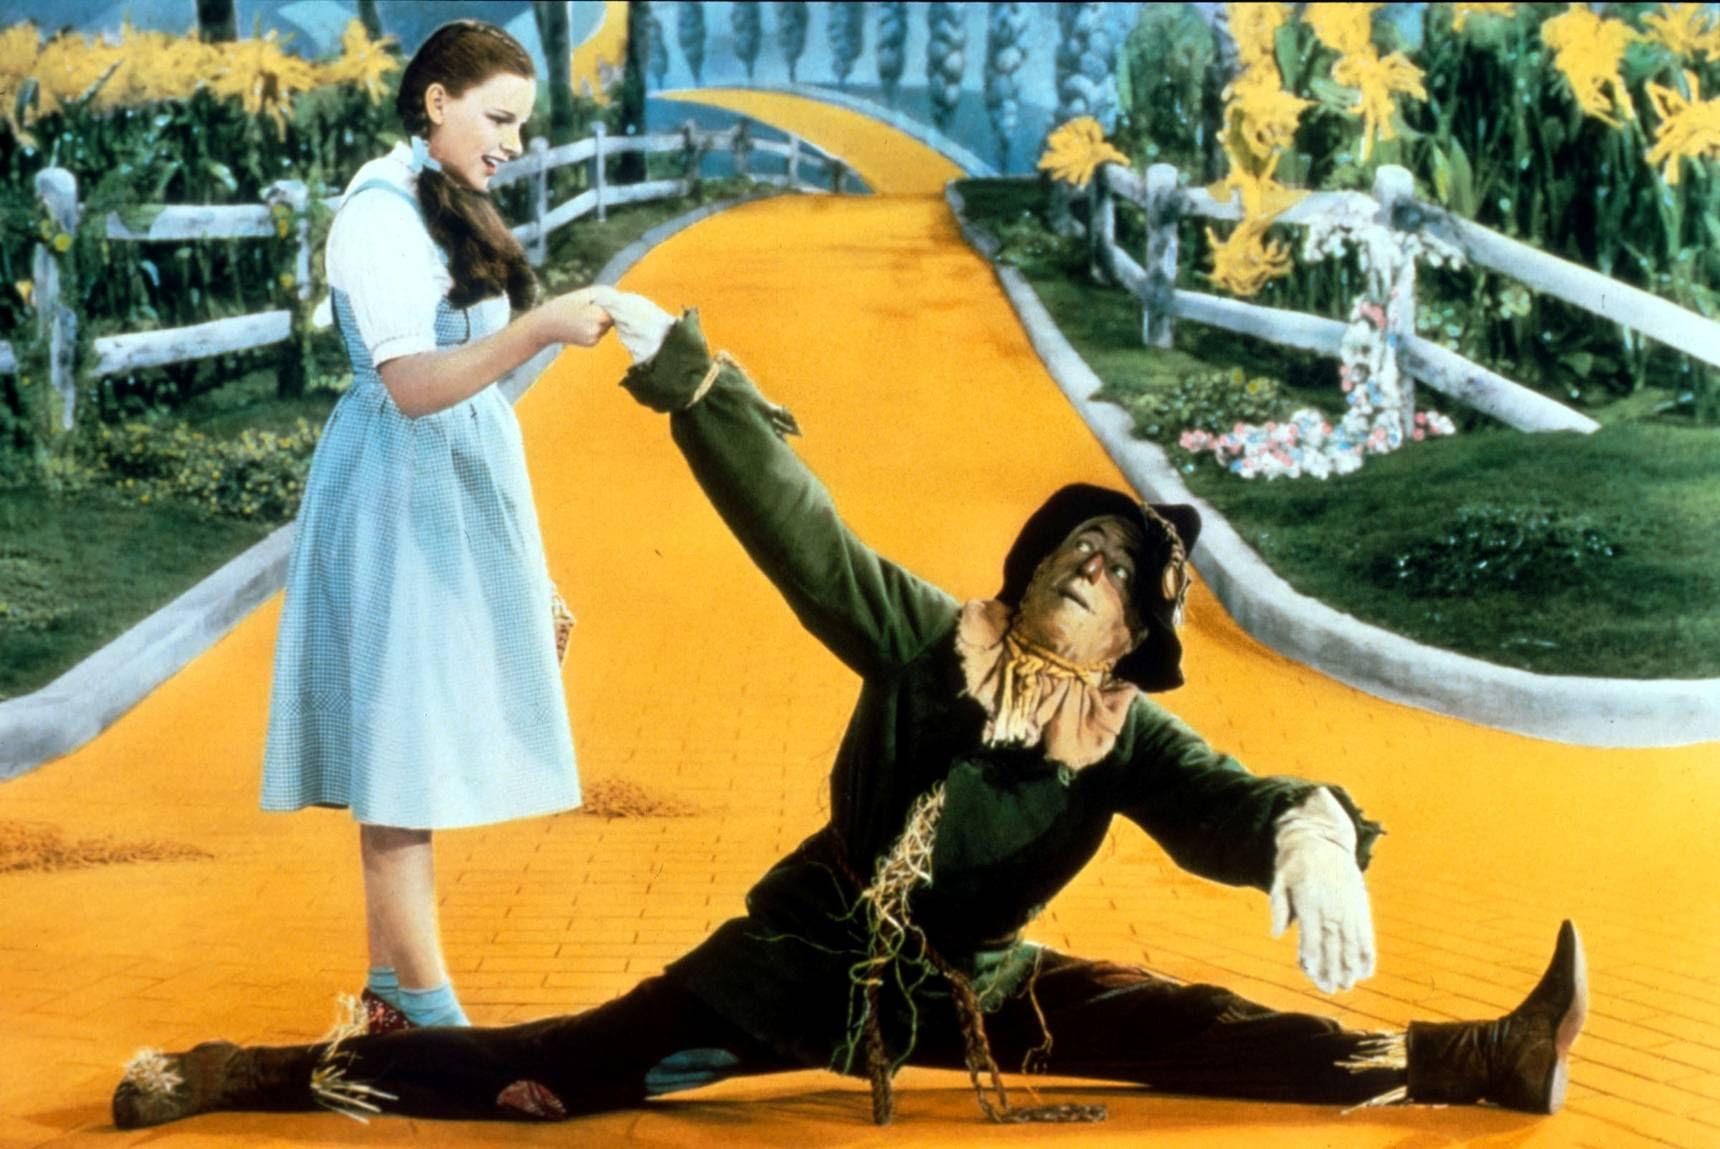 Mandela Effect, Wizard of Oz (Two different ones)